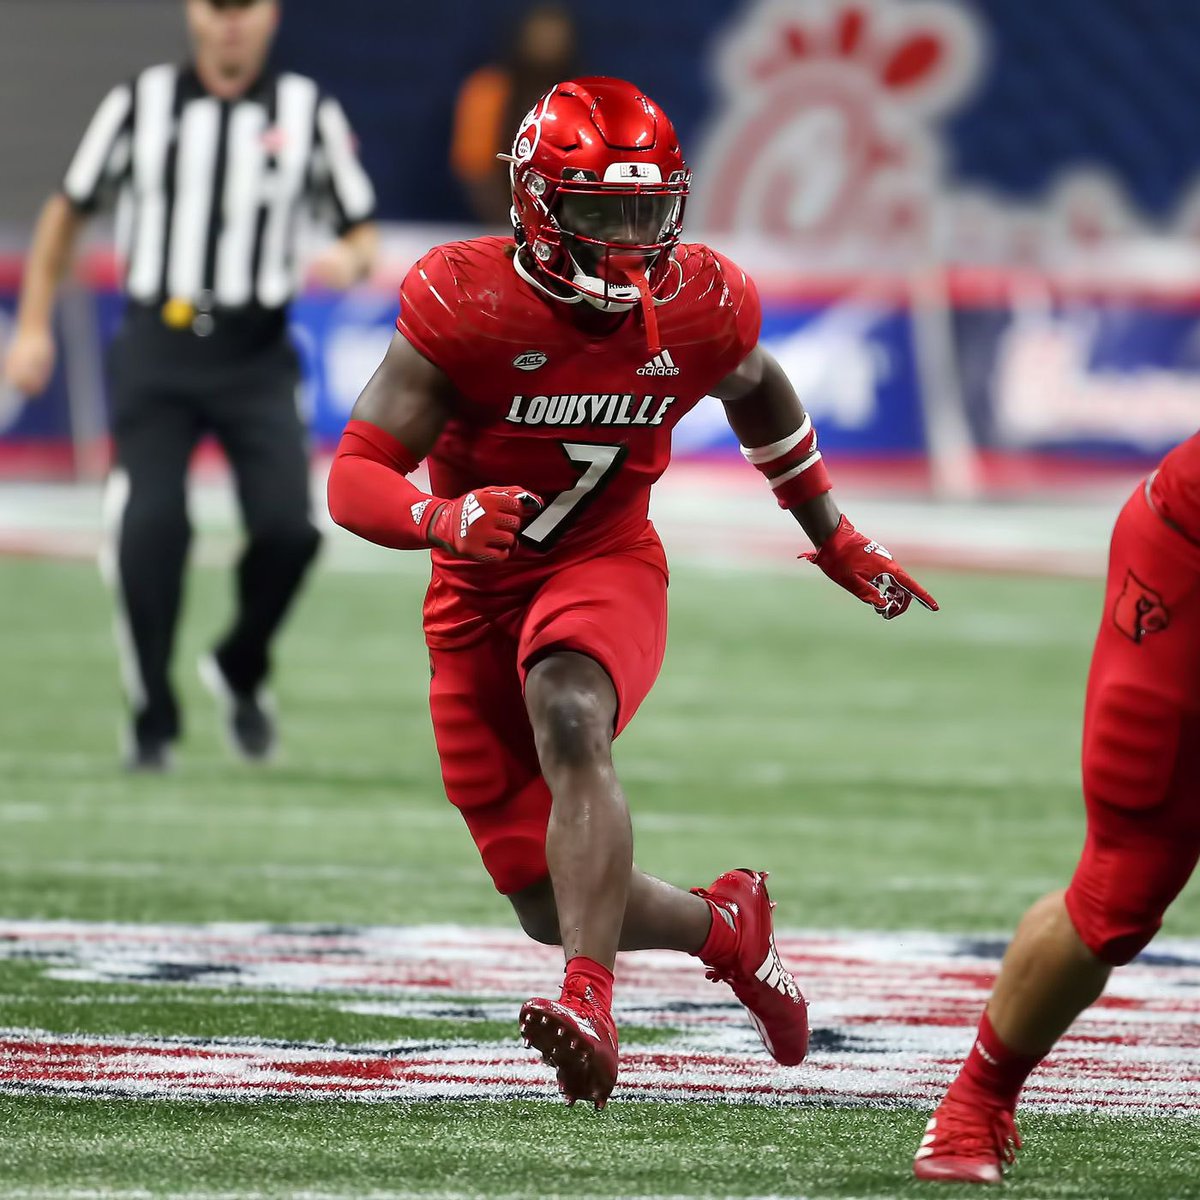 Beyond Blessed and Honored To Receive An Offer From The University Of Louisville @CoachRonEnglish @CoachSteveEllis @CoachKLang @EvanshsFootball @CoachAJBrooks @A_G_Waseem @Andrew_Ivins @KiddRyno_Rivals @LouisvilleFB #GoCards